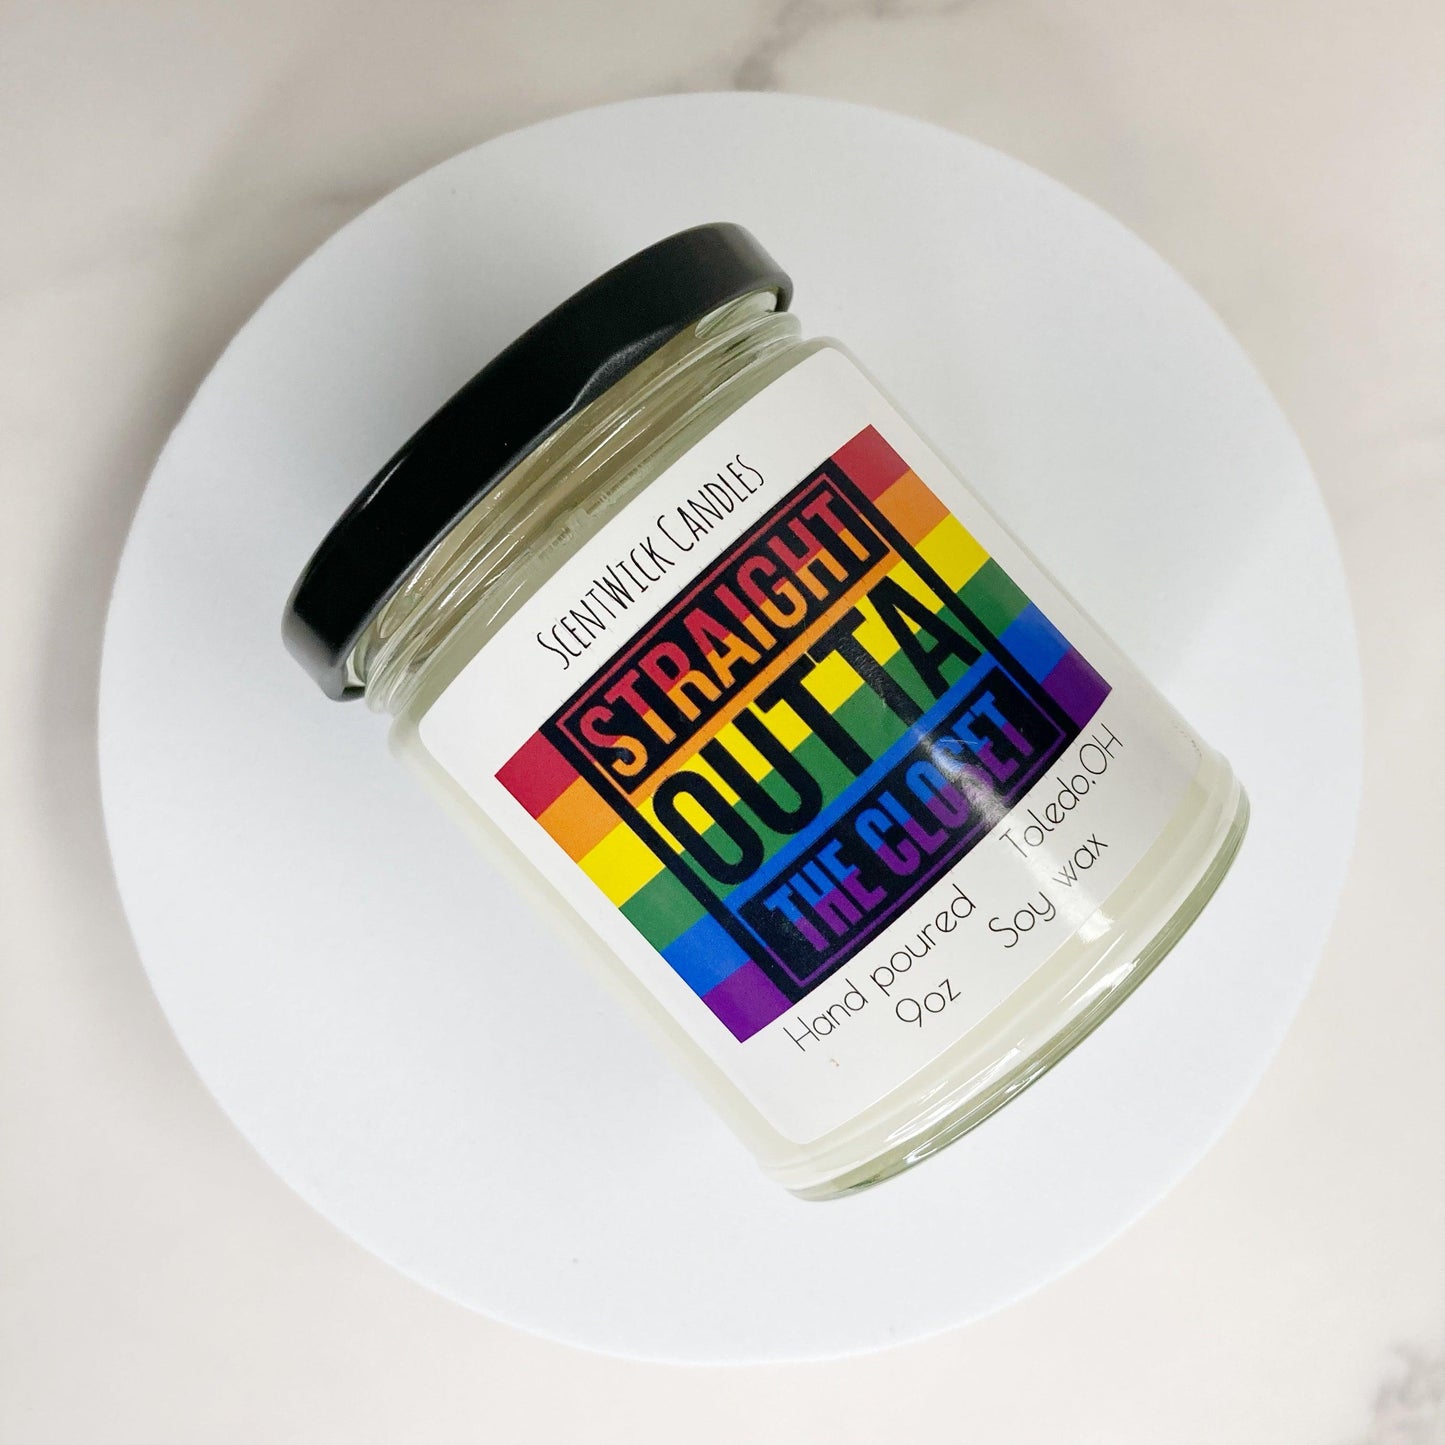 LGBT Gay Pride Candle Straight outta the closet - ScentWick Candles